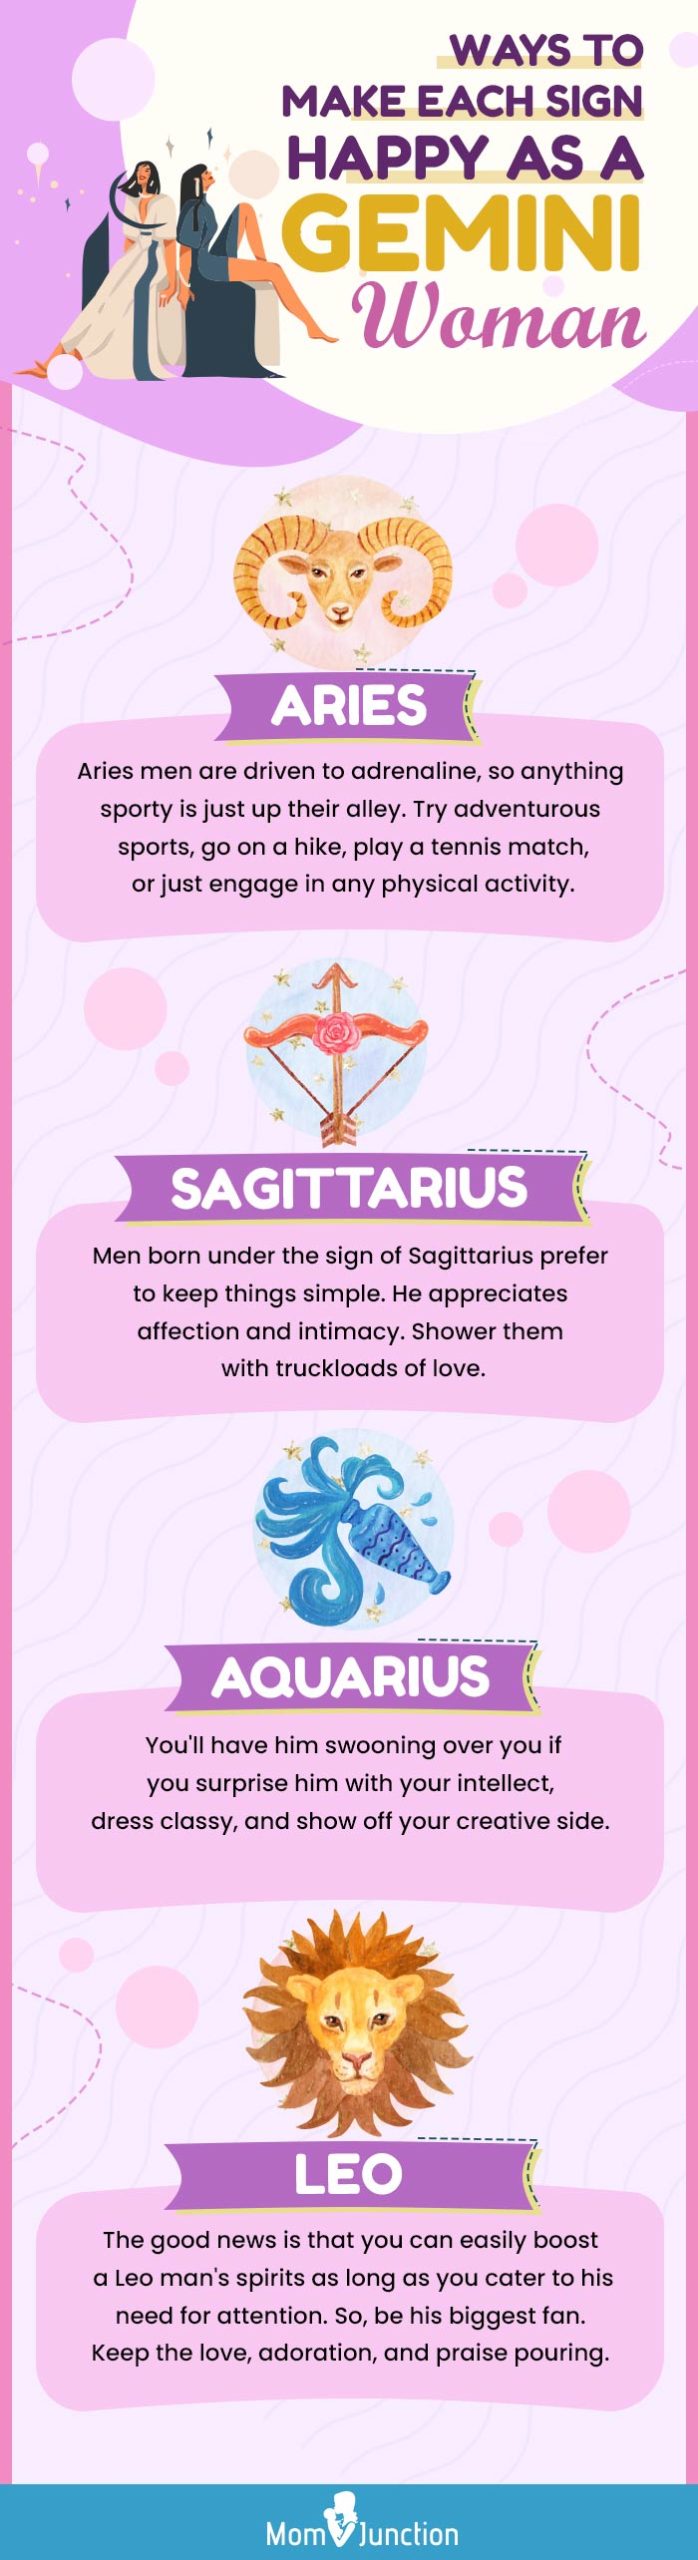 ways to make each sign happy as a gemini woman (infographic)